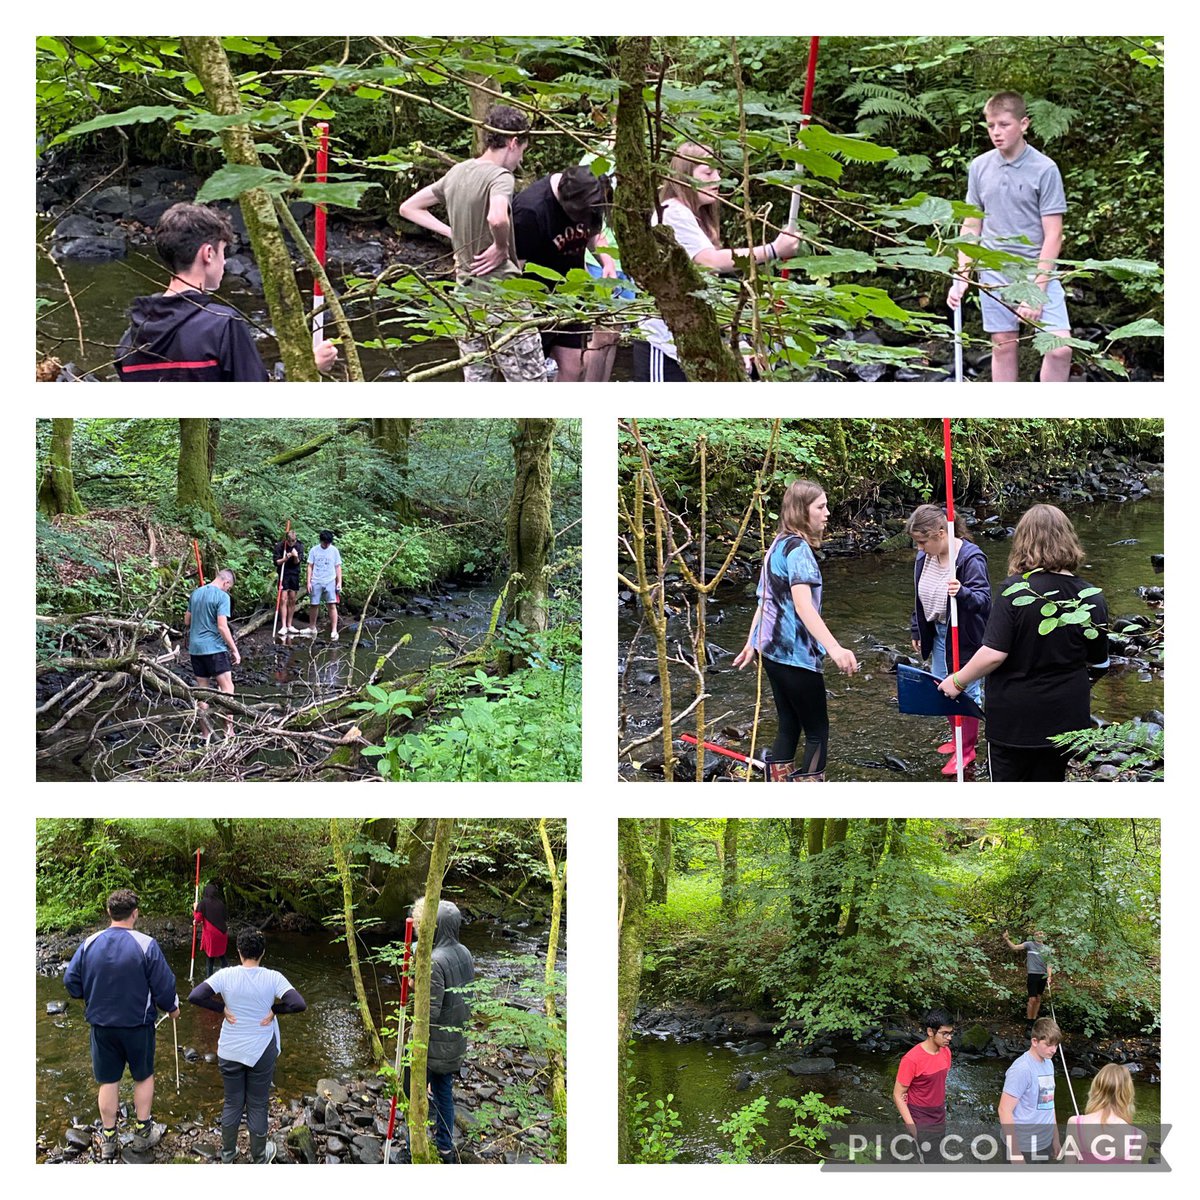 Year 10 Geography field work is well under way at Gelliwernen woods
#beambitious #beinformed ❤️💛💙